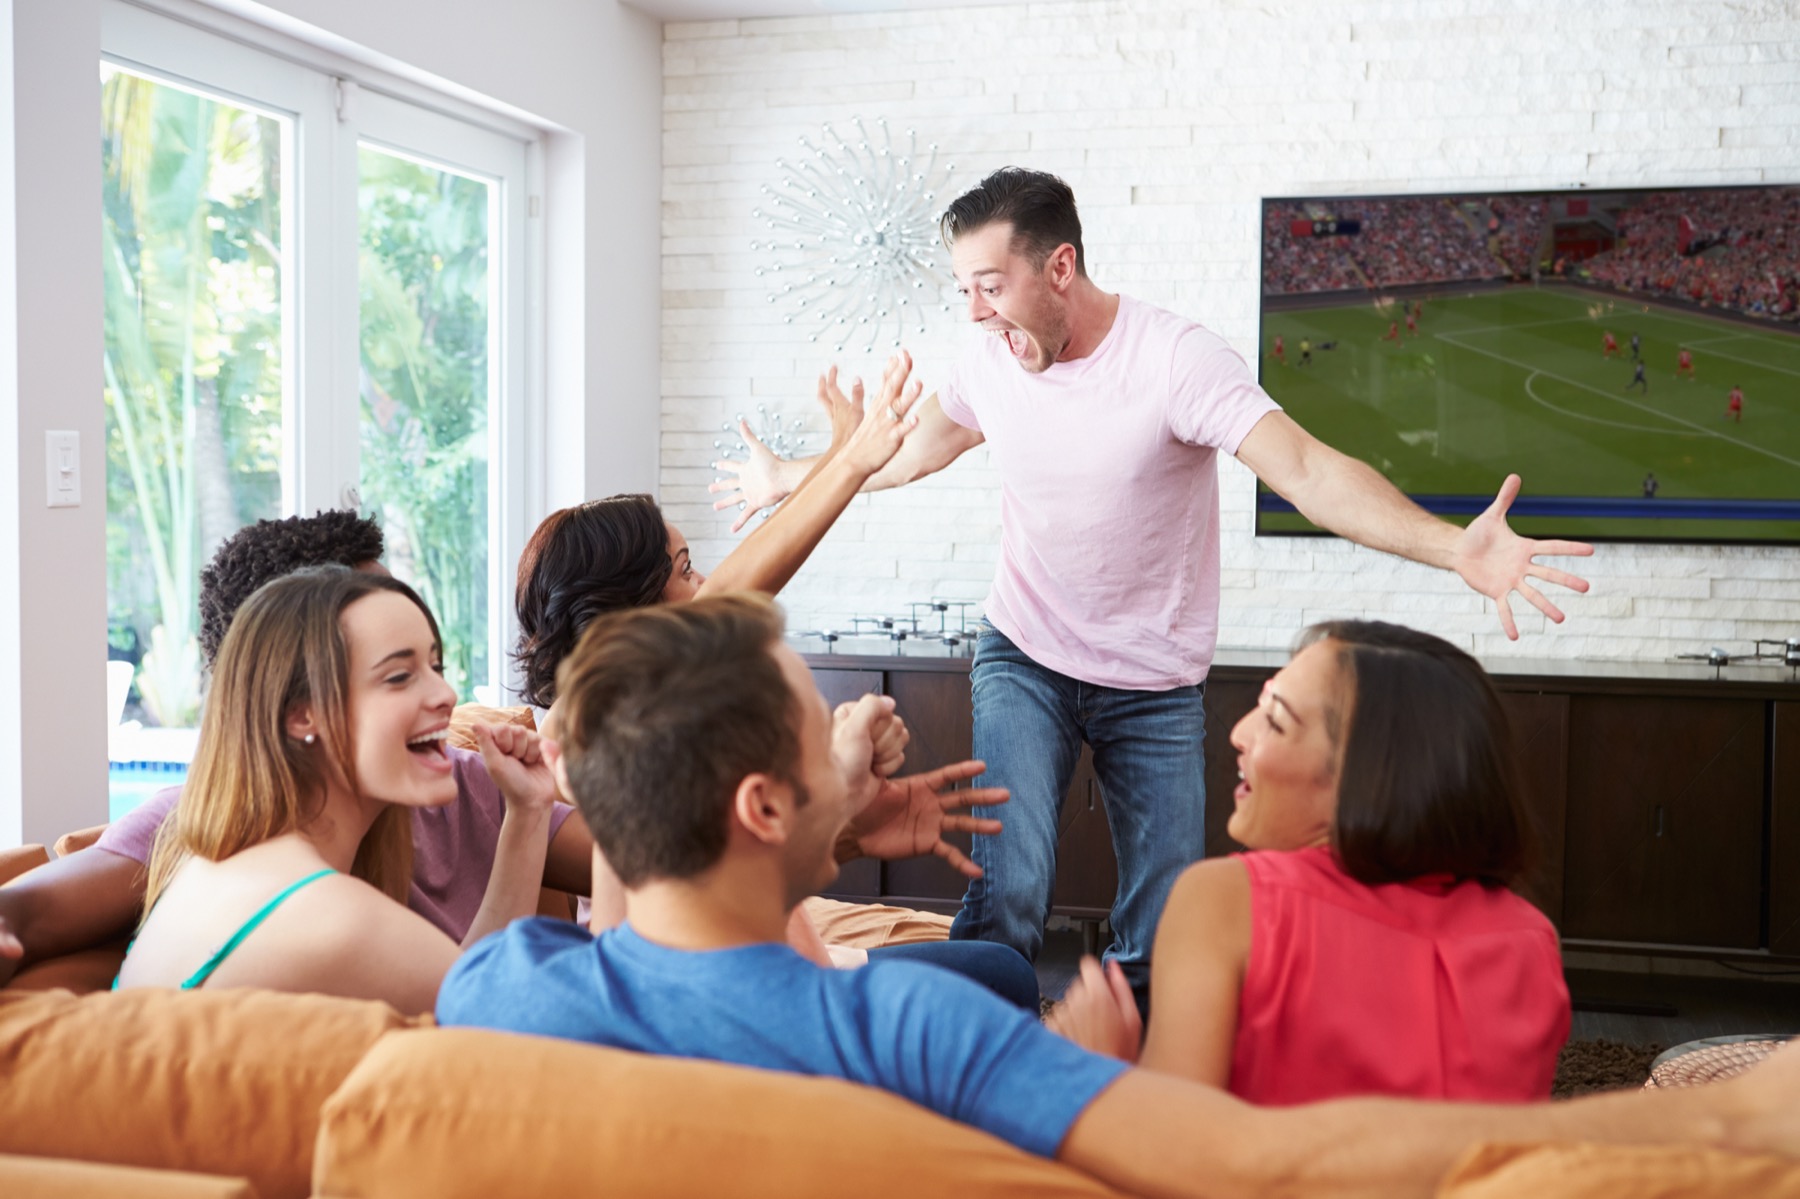 5 ways cheering for your favorite World Cup team improves your health